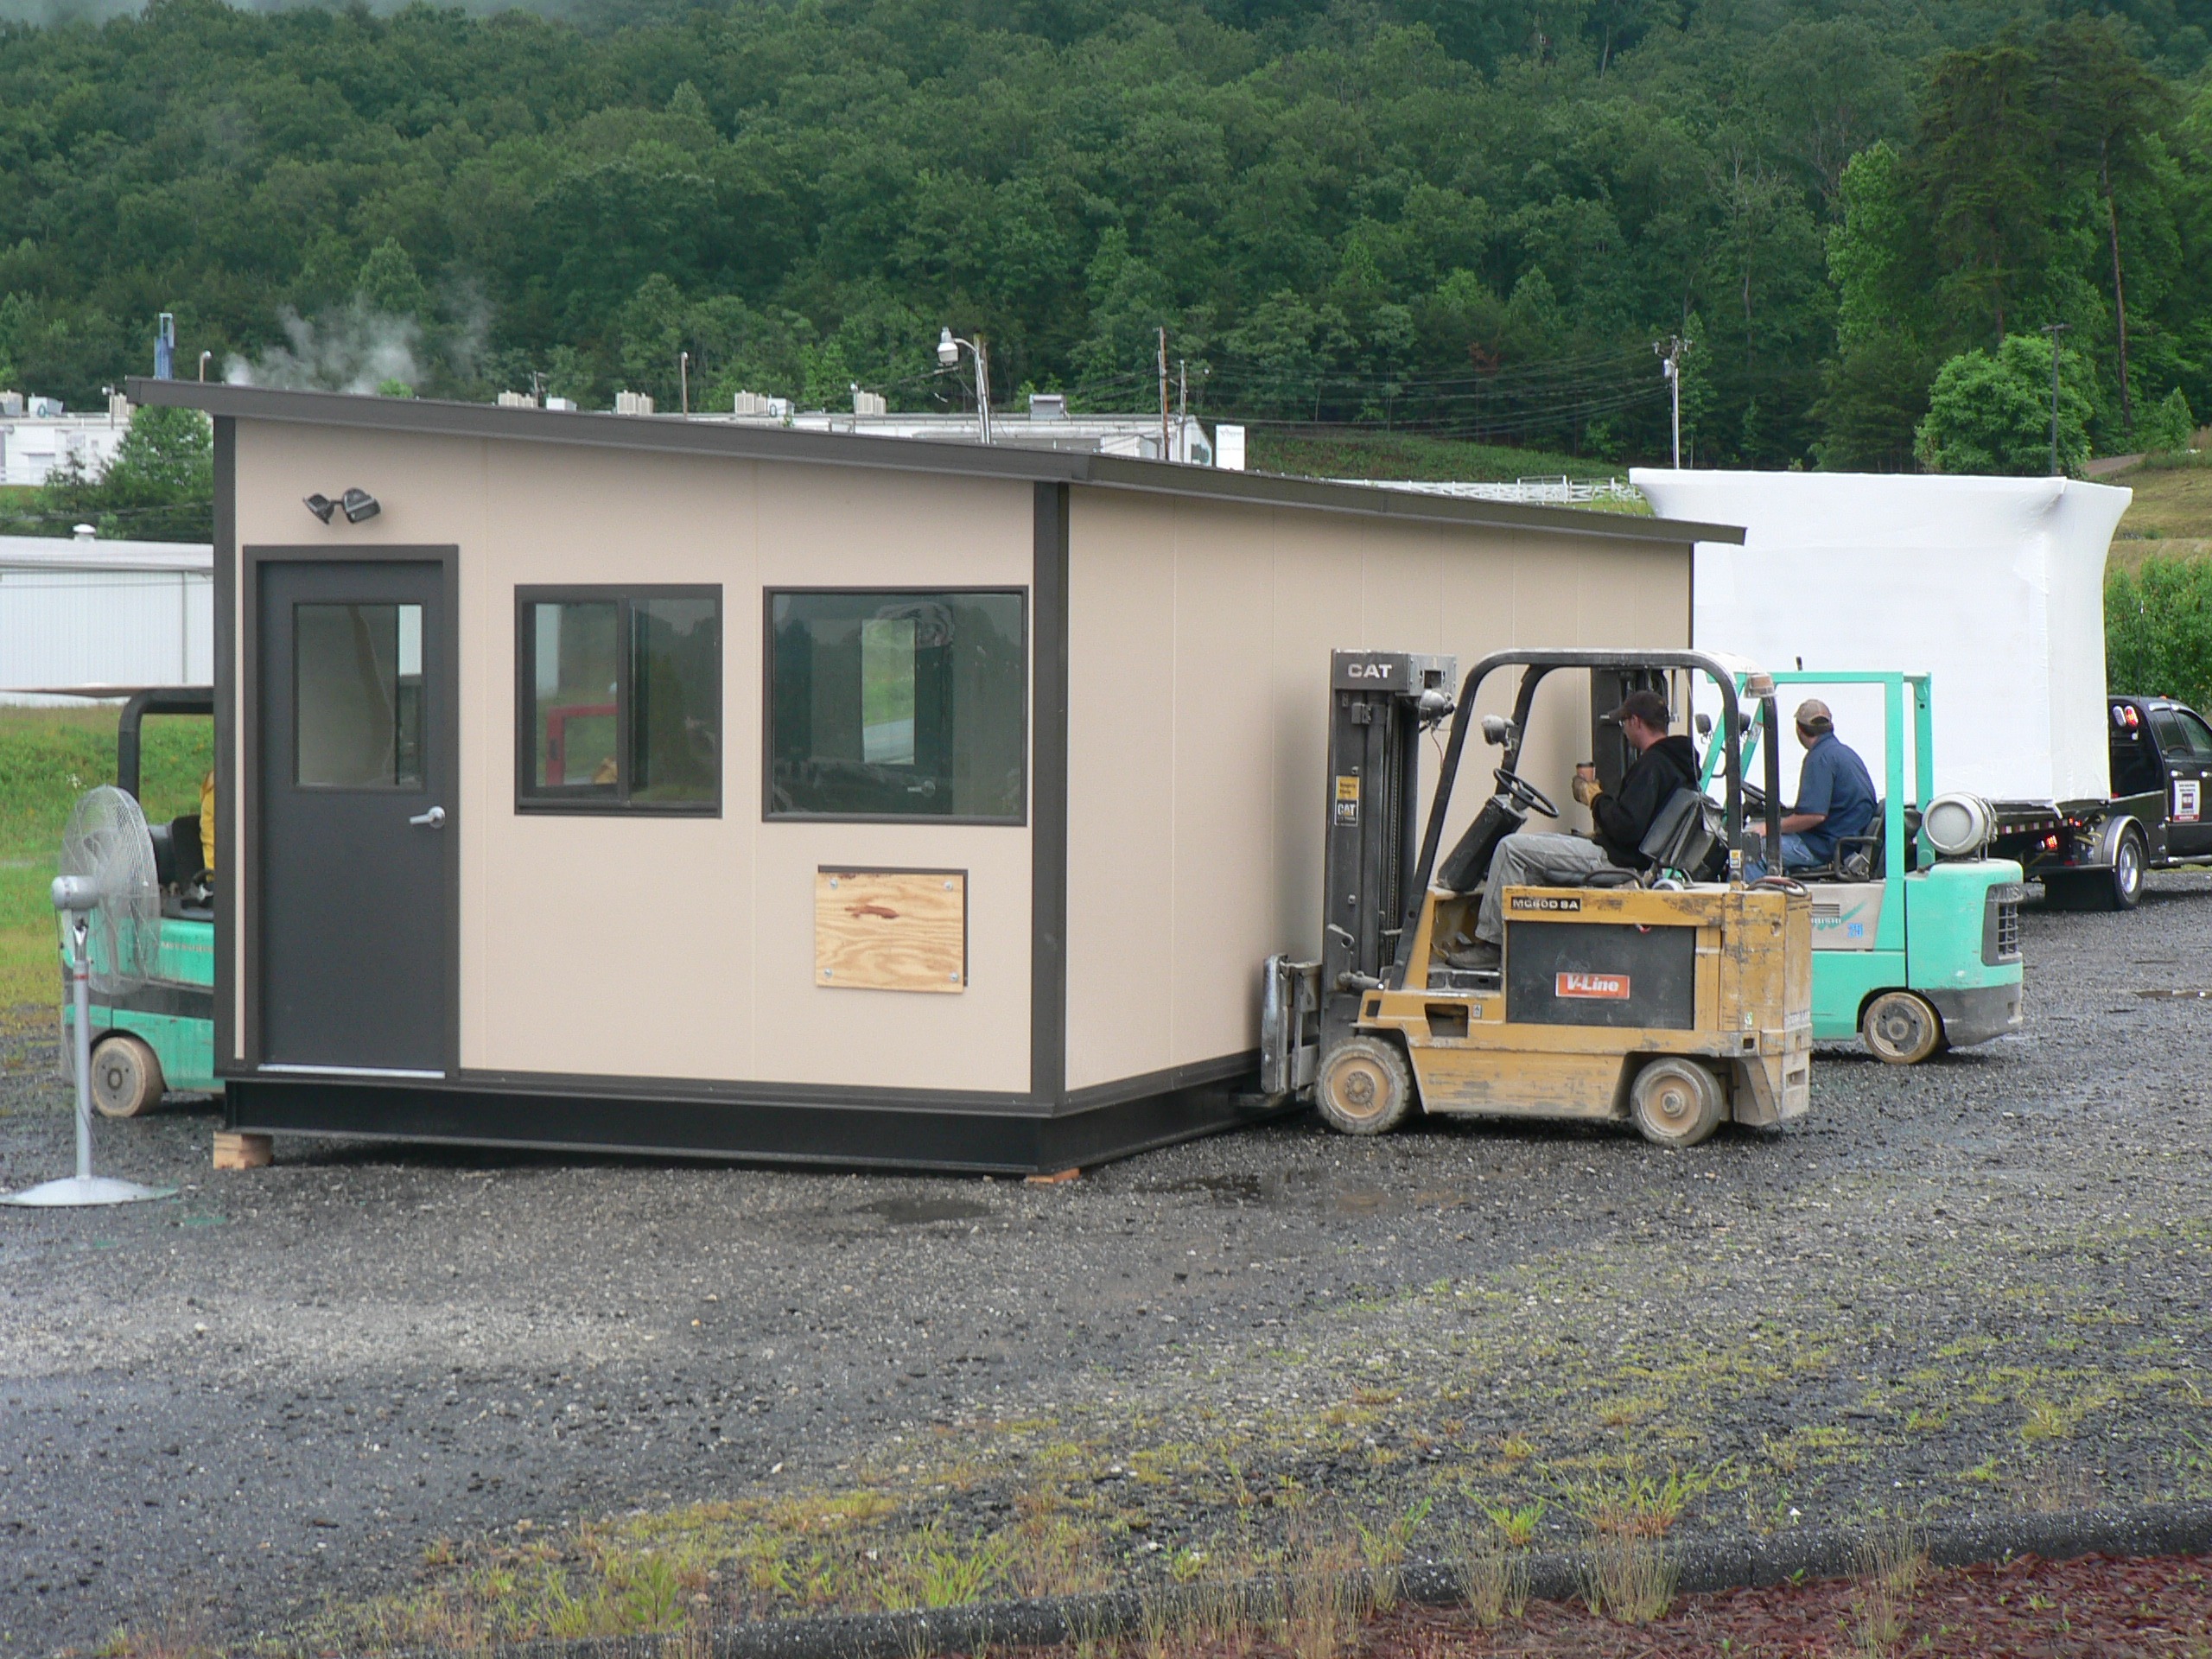  on-site portable office provides